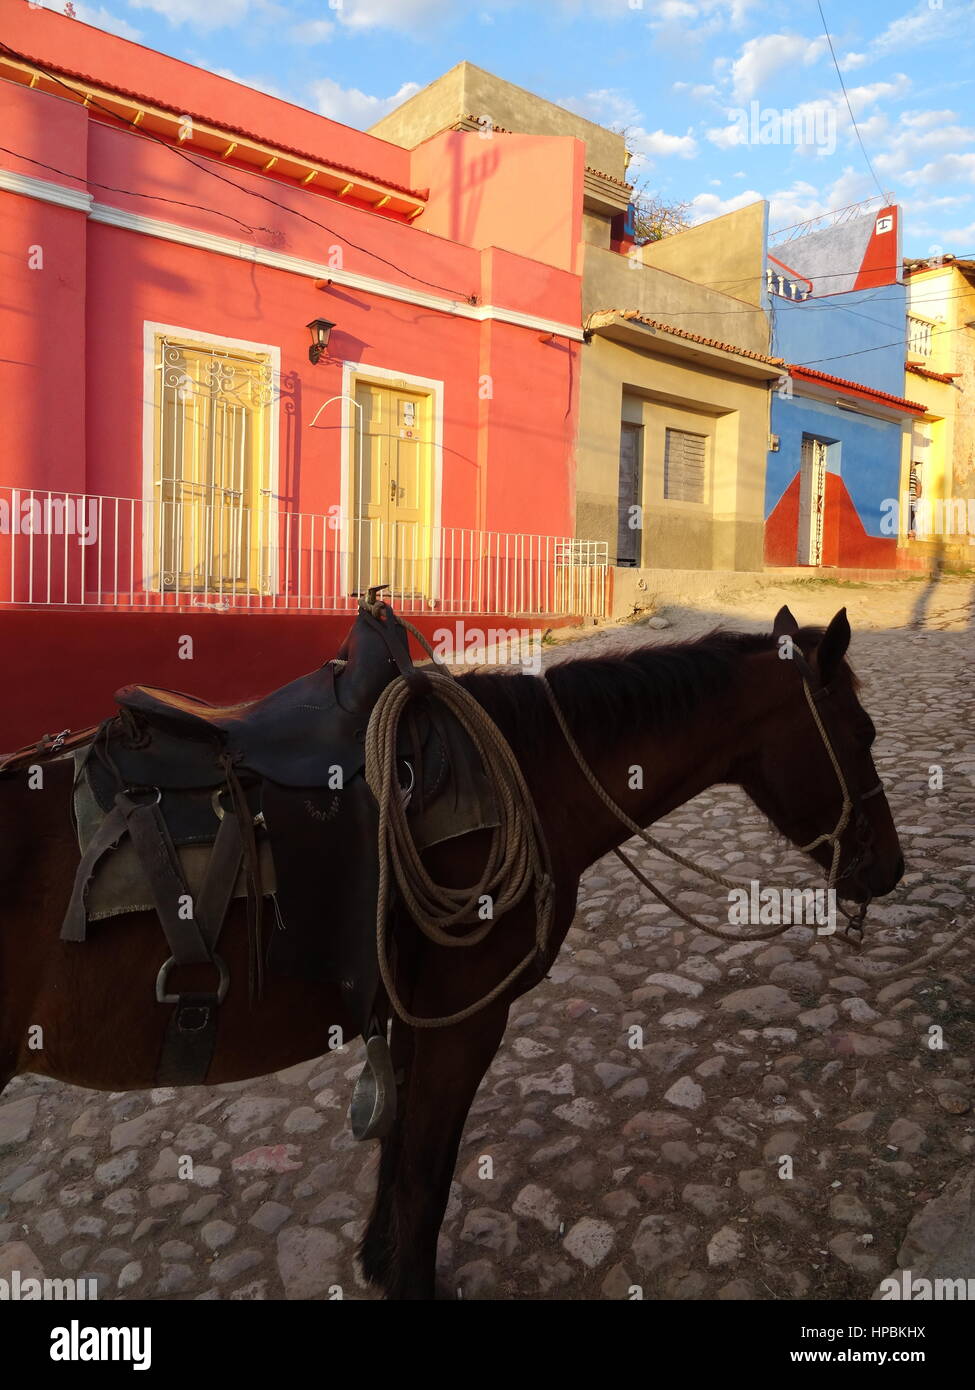 Horse with saddle on a cobbled street in Trinidad,Cuba with colourful houses in the background and bright sunlight Stock Photo